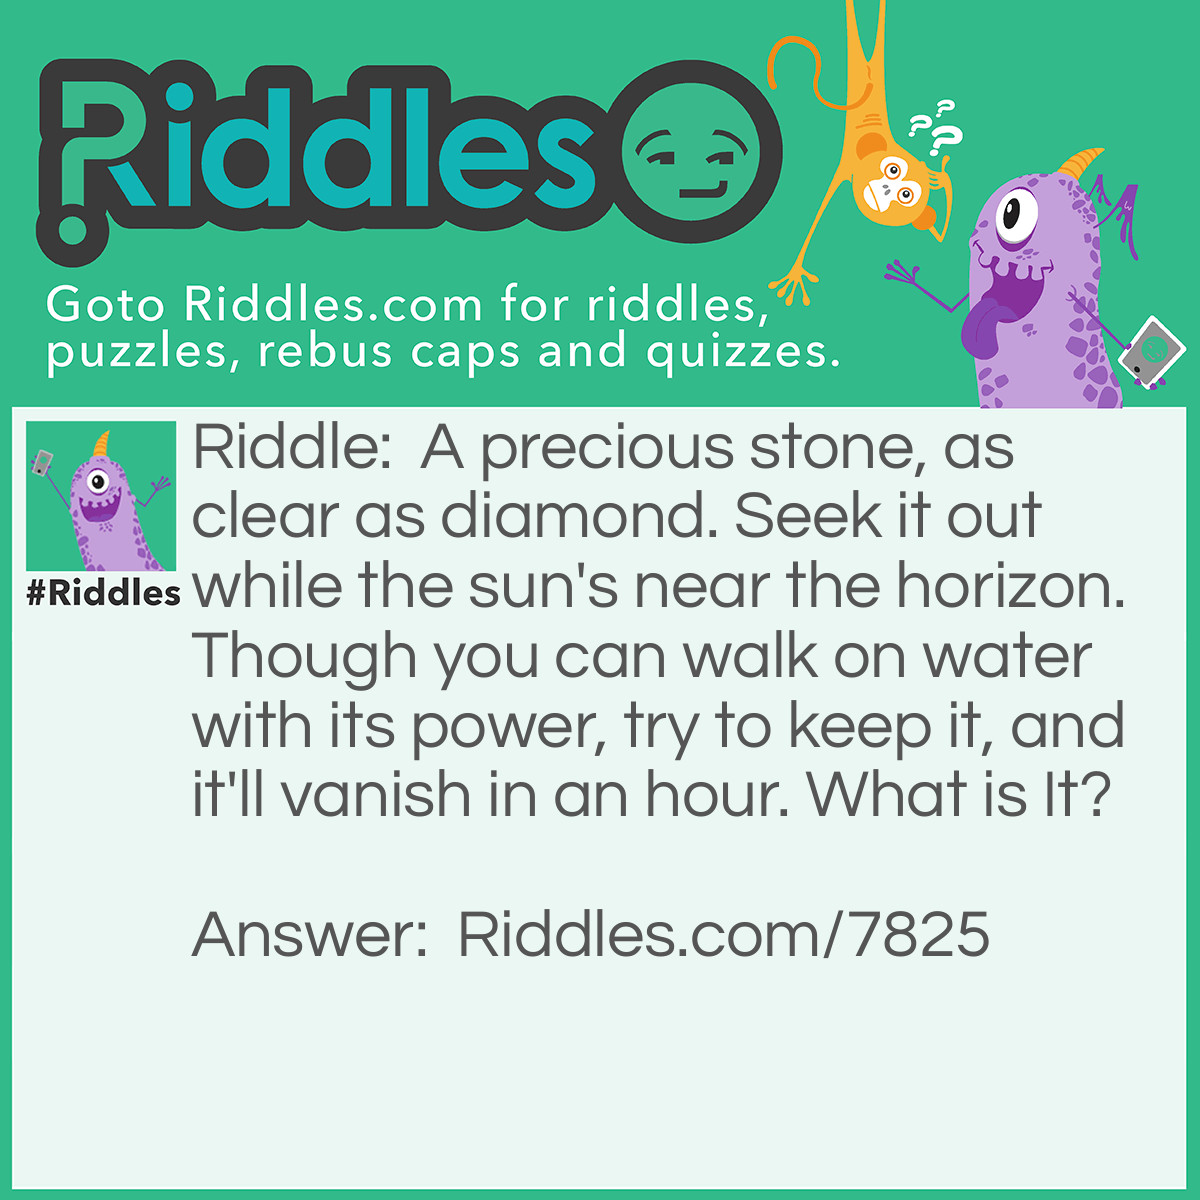 Riddle: A precious stone, as clear as diamond. Seek it out while the sun's near the horizon. Though you can walk on water with its power, try to keep it, and it'll vanish in an hour. What is It? Answer: Ice